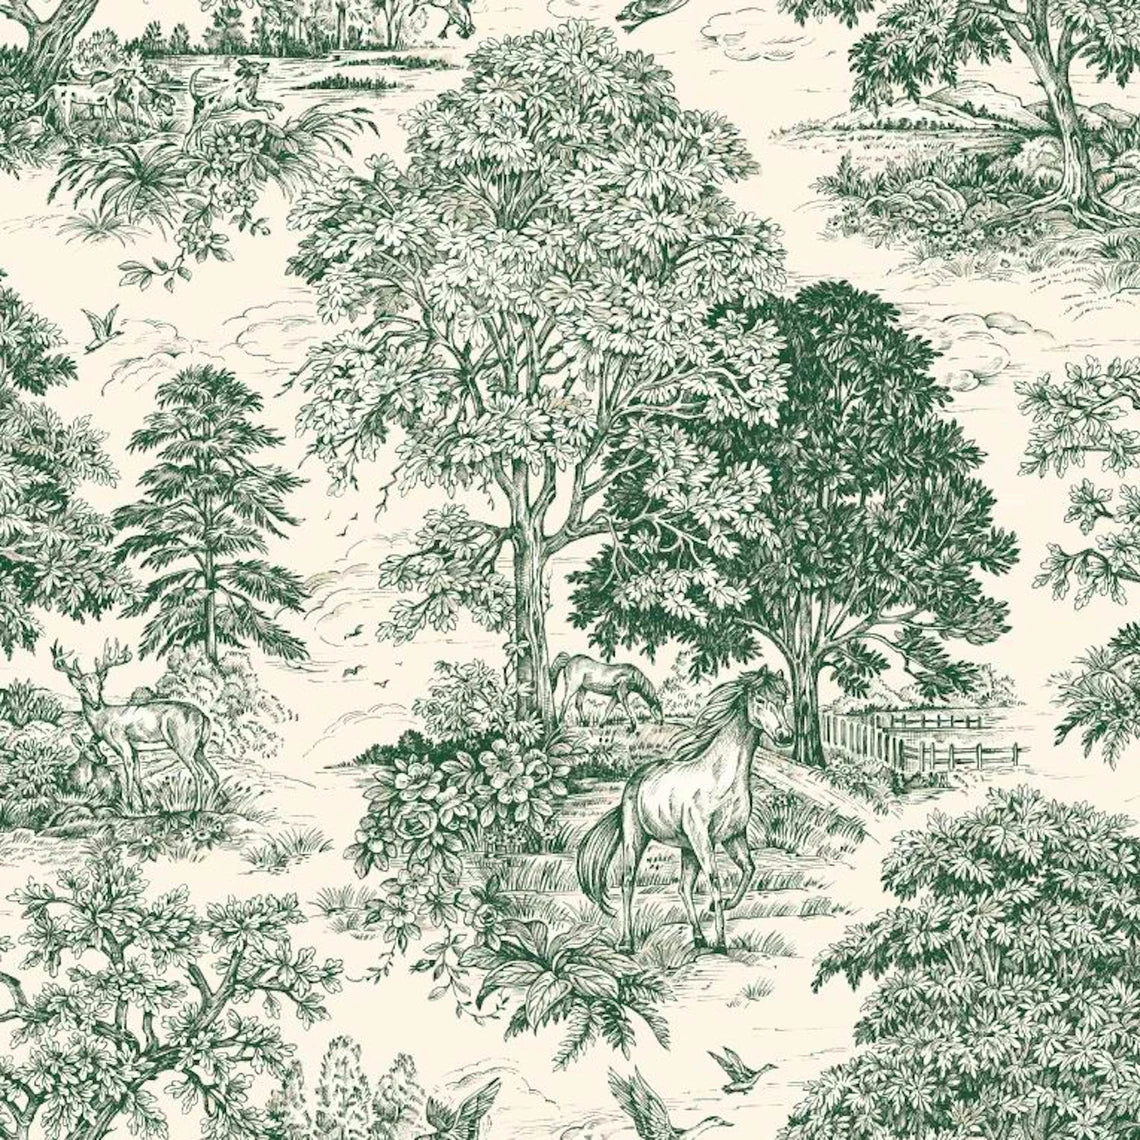 Tailored Bedskirt in Yellowstone Classic Green Country Toile- Horses, Deer, Dogs- Large Scale